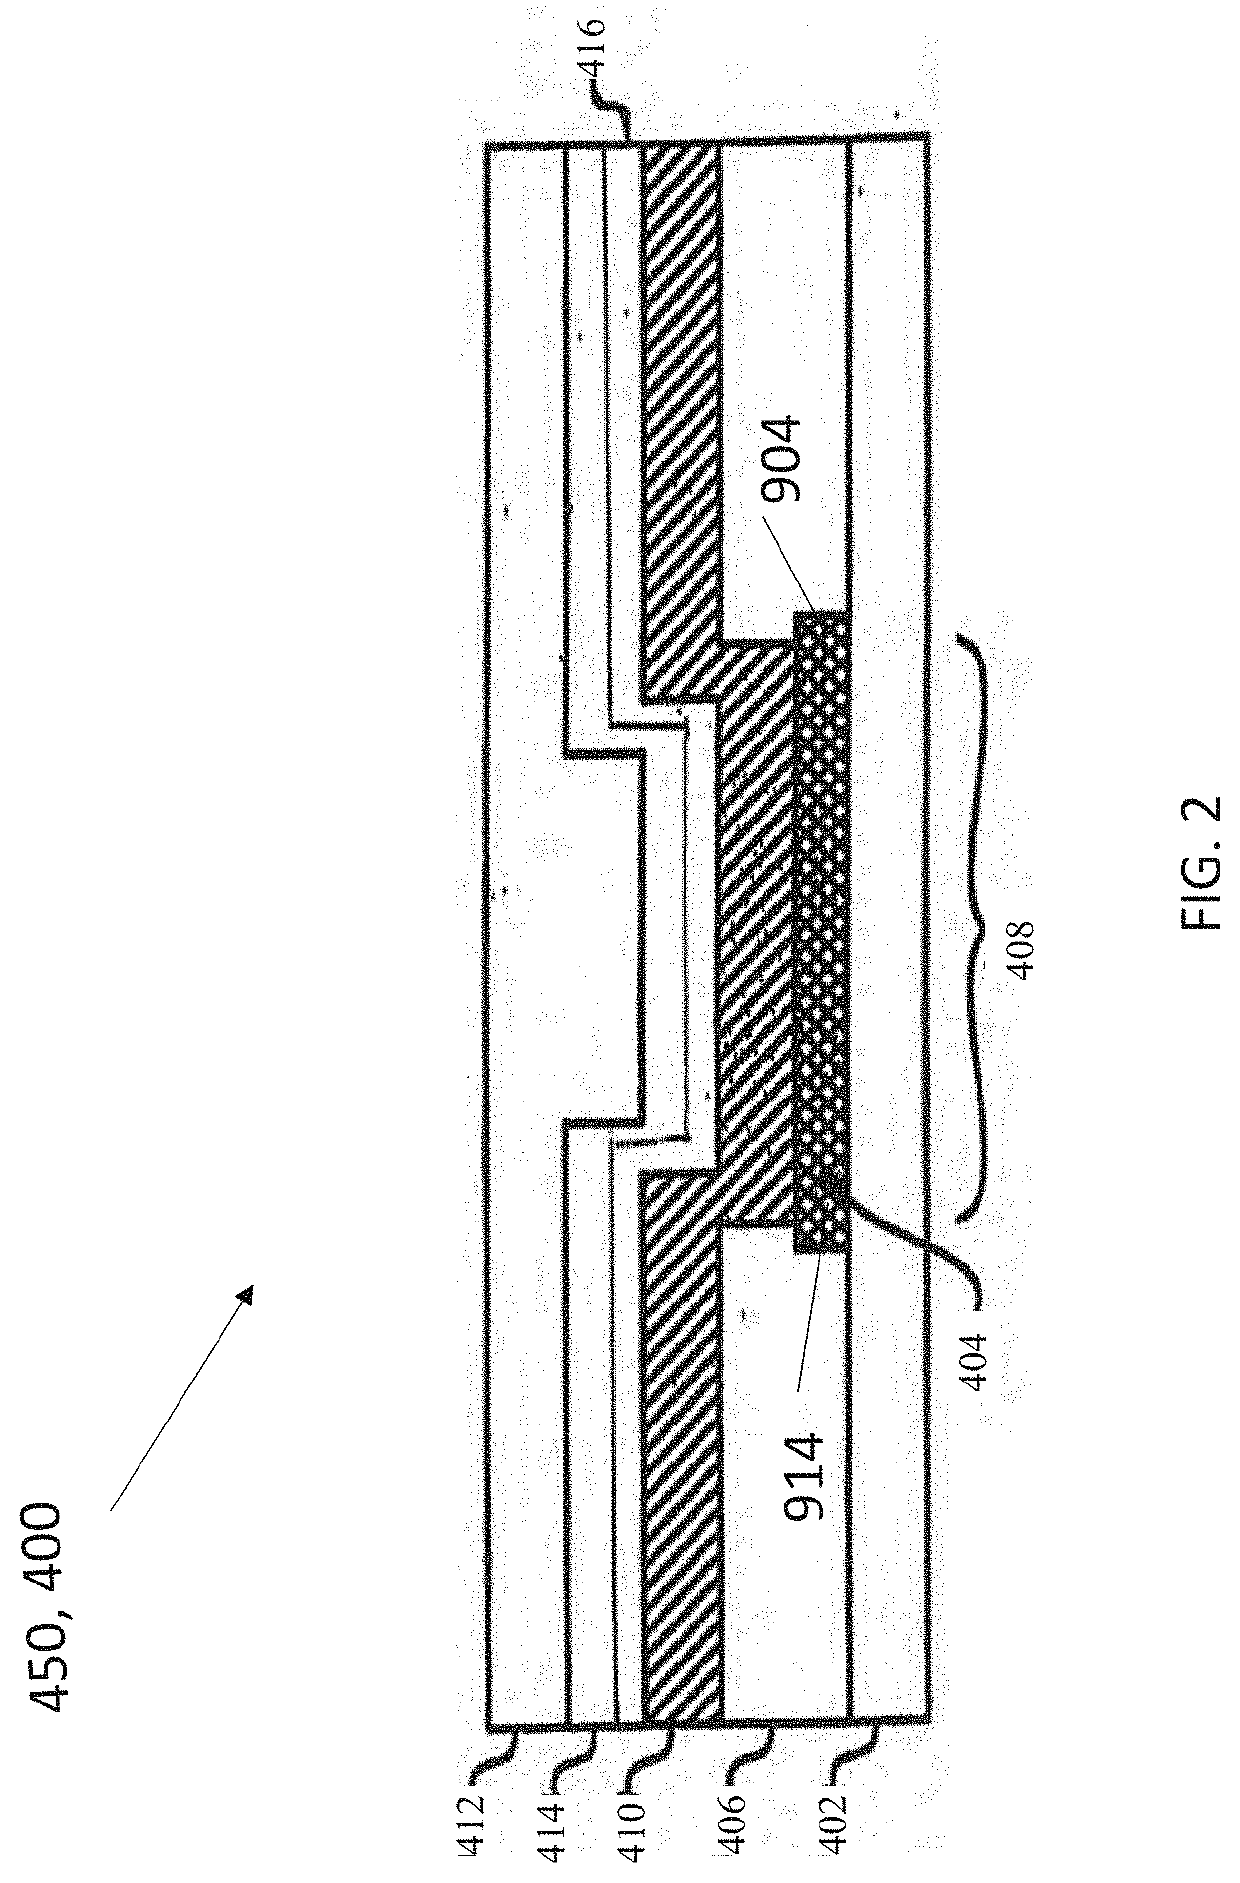 Metal pillar device structures and methods for making and using them in electrochemical and/or electrocatalytic applications